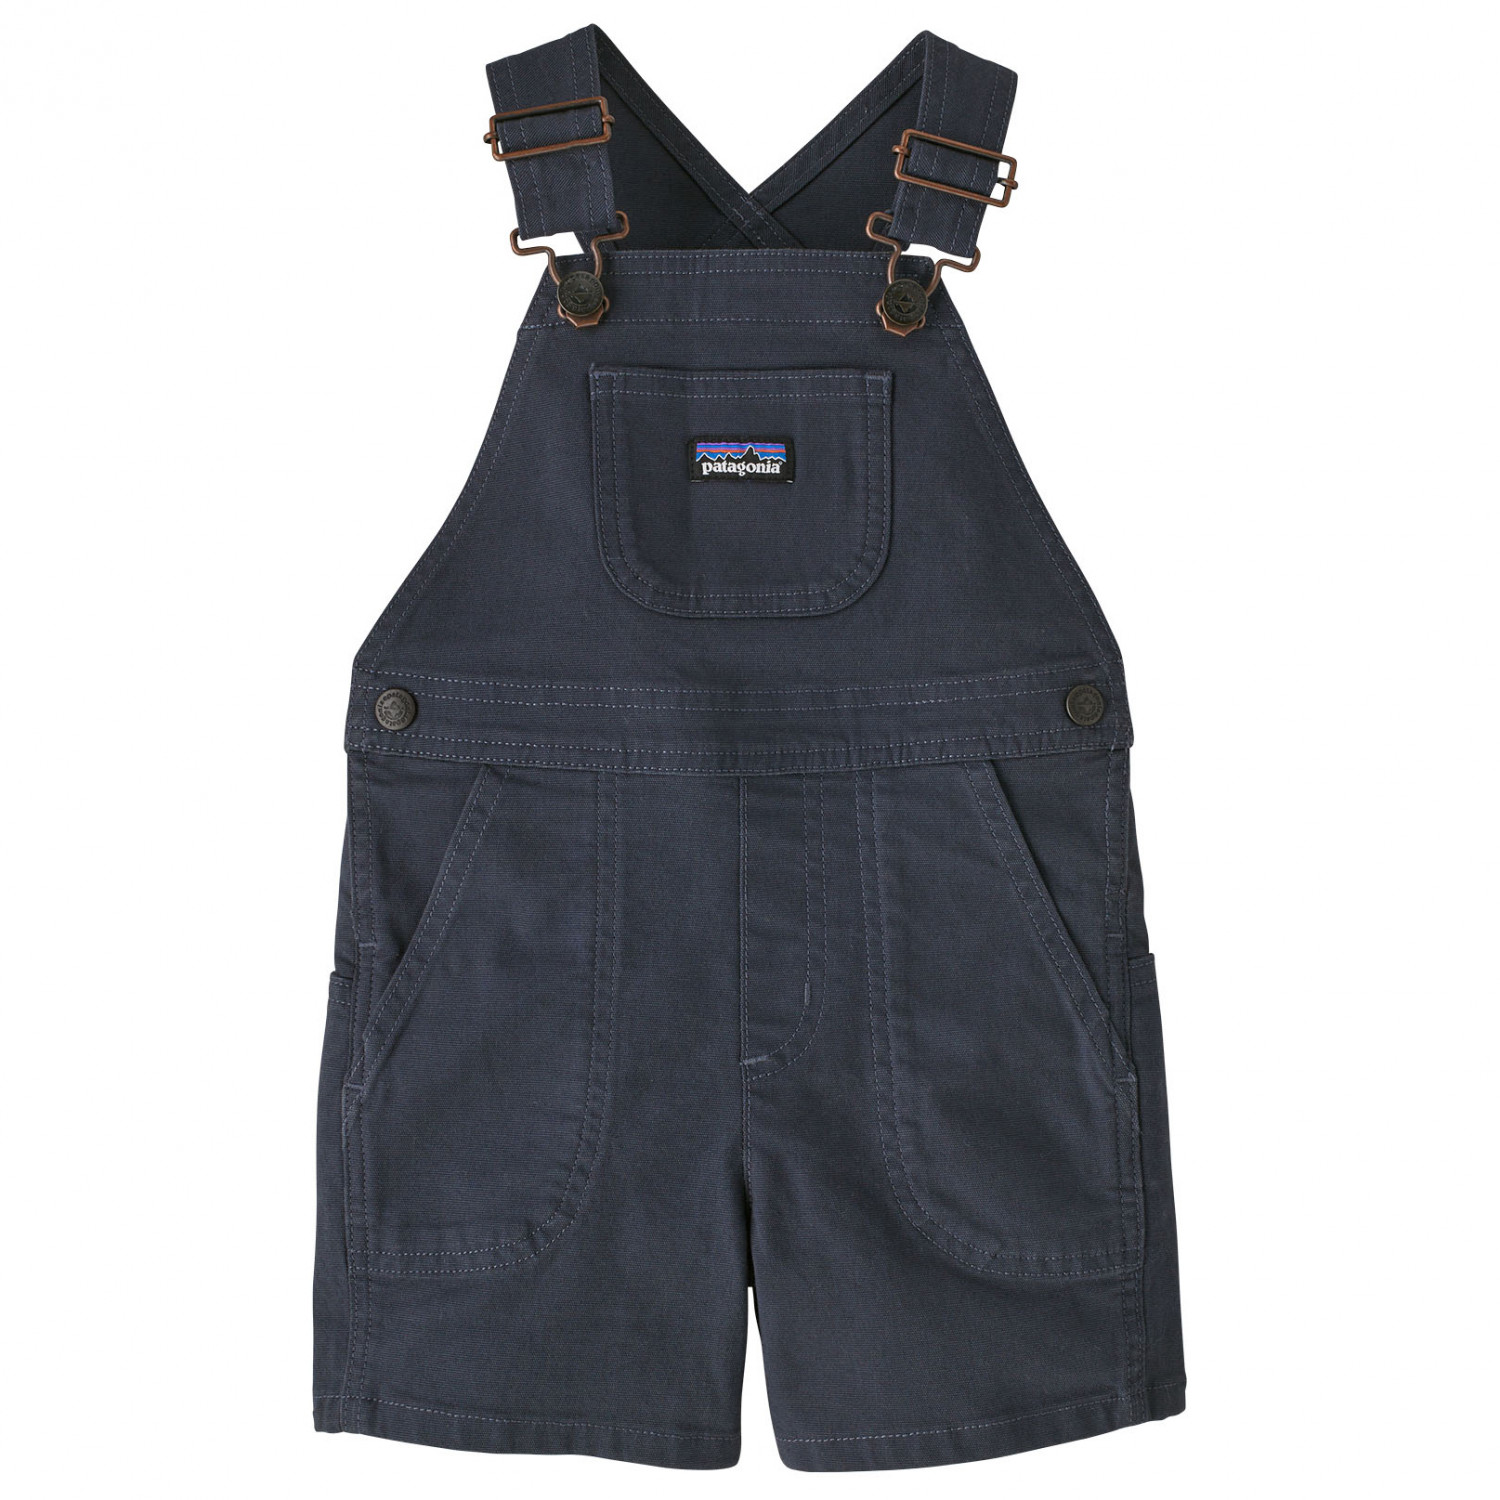 Шорты Patagonia Kid's Stand Up Shortalls, цвет Smolder Blue шорты patagonia patagonia stand up 7 in